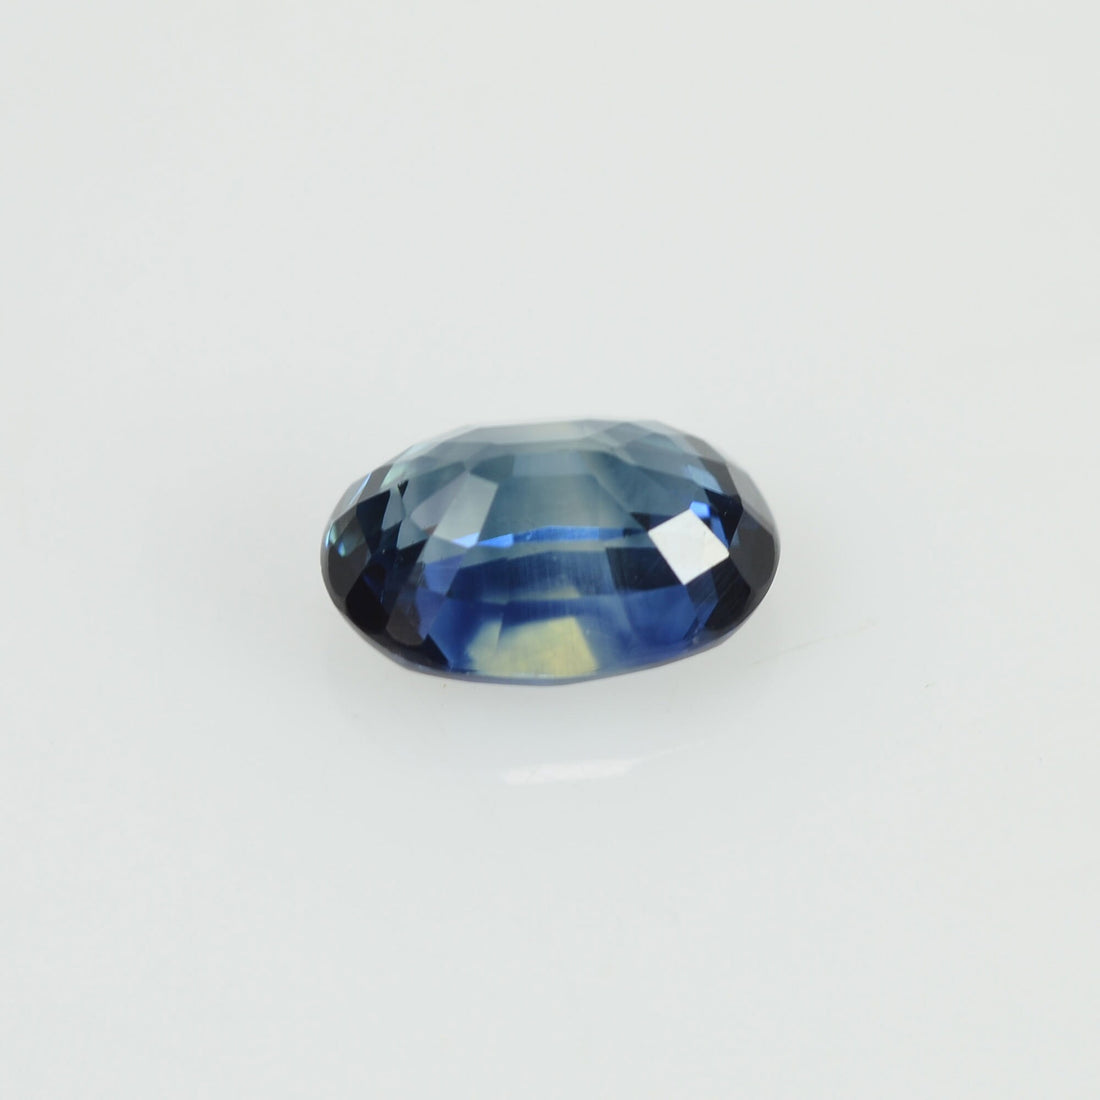 0.60 cts Natural Blue Sapphire Loose Gemstone Oval Cut